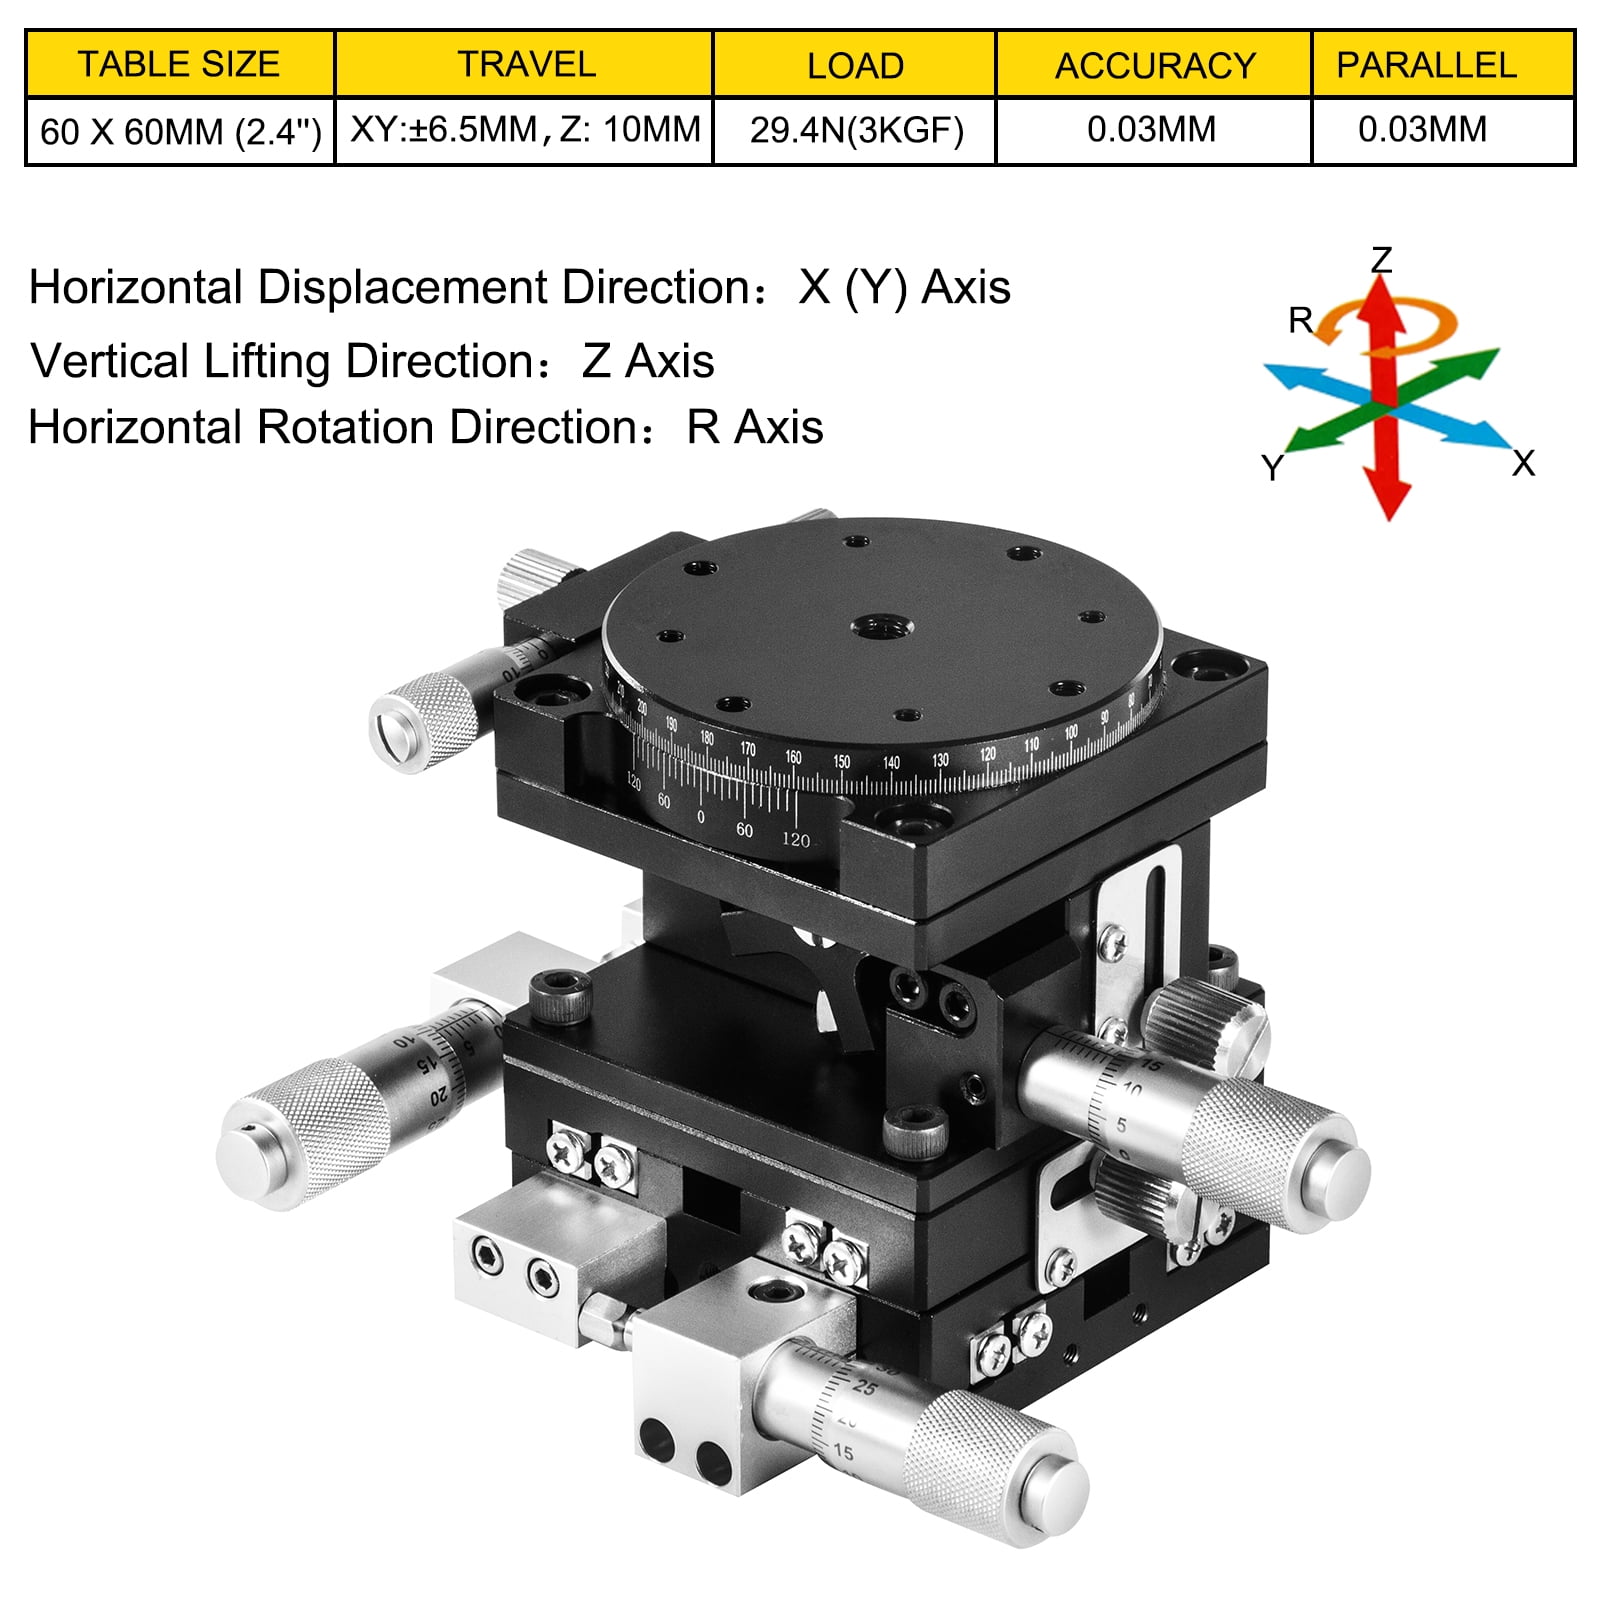 XYZ 3 Axis Linear Stage,Trimming Platform,6060mm Bearing Tuning Sliding Table,for Machine Tools,Automation Optical Equipment